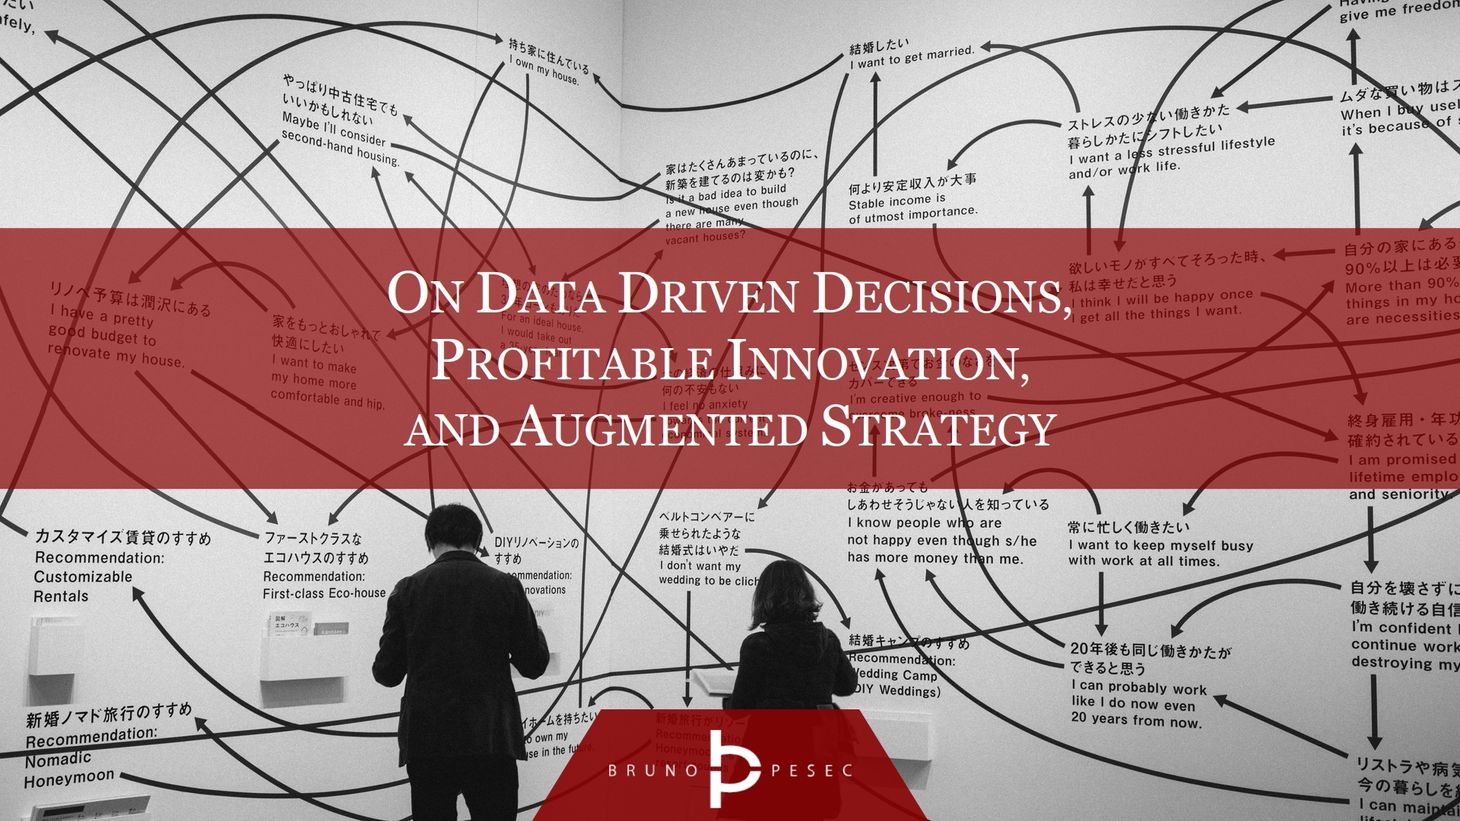 On data driven decisions, profitable innovation, and augmented strategy